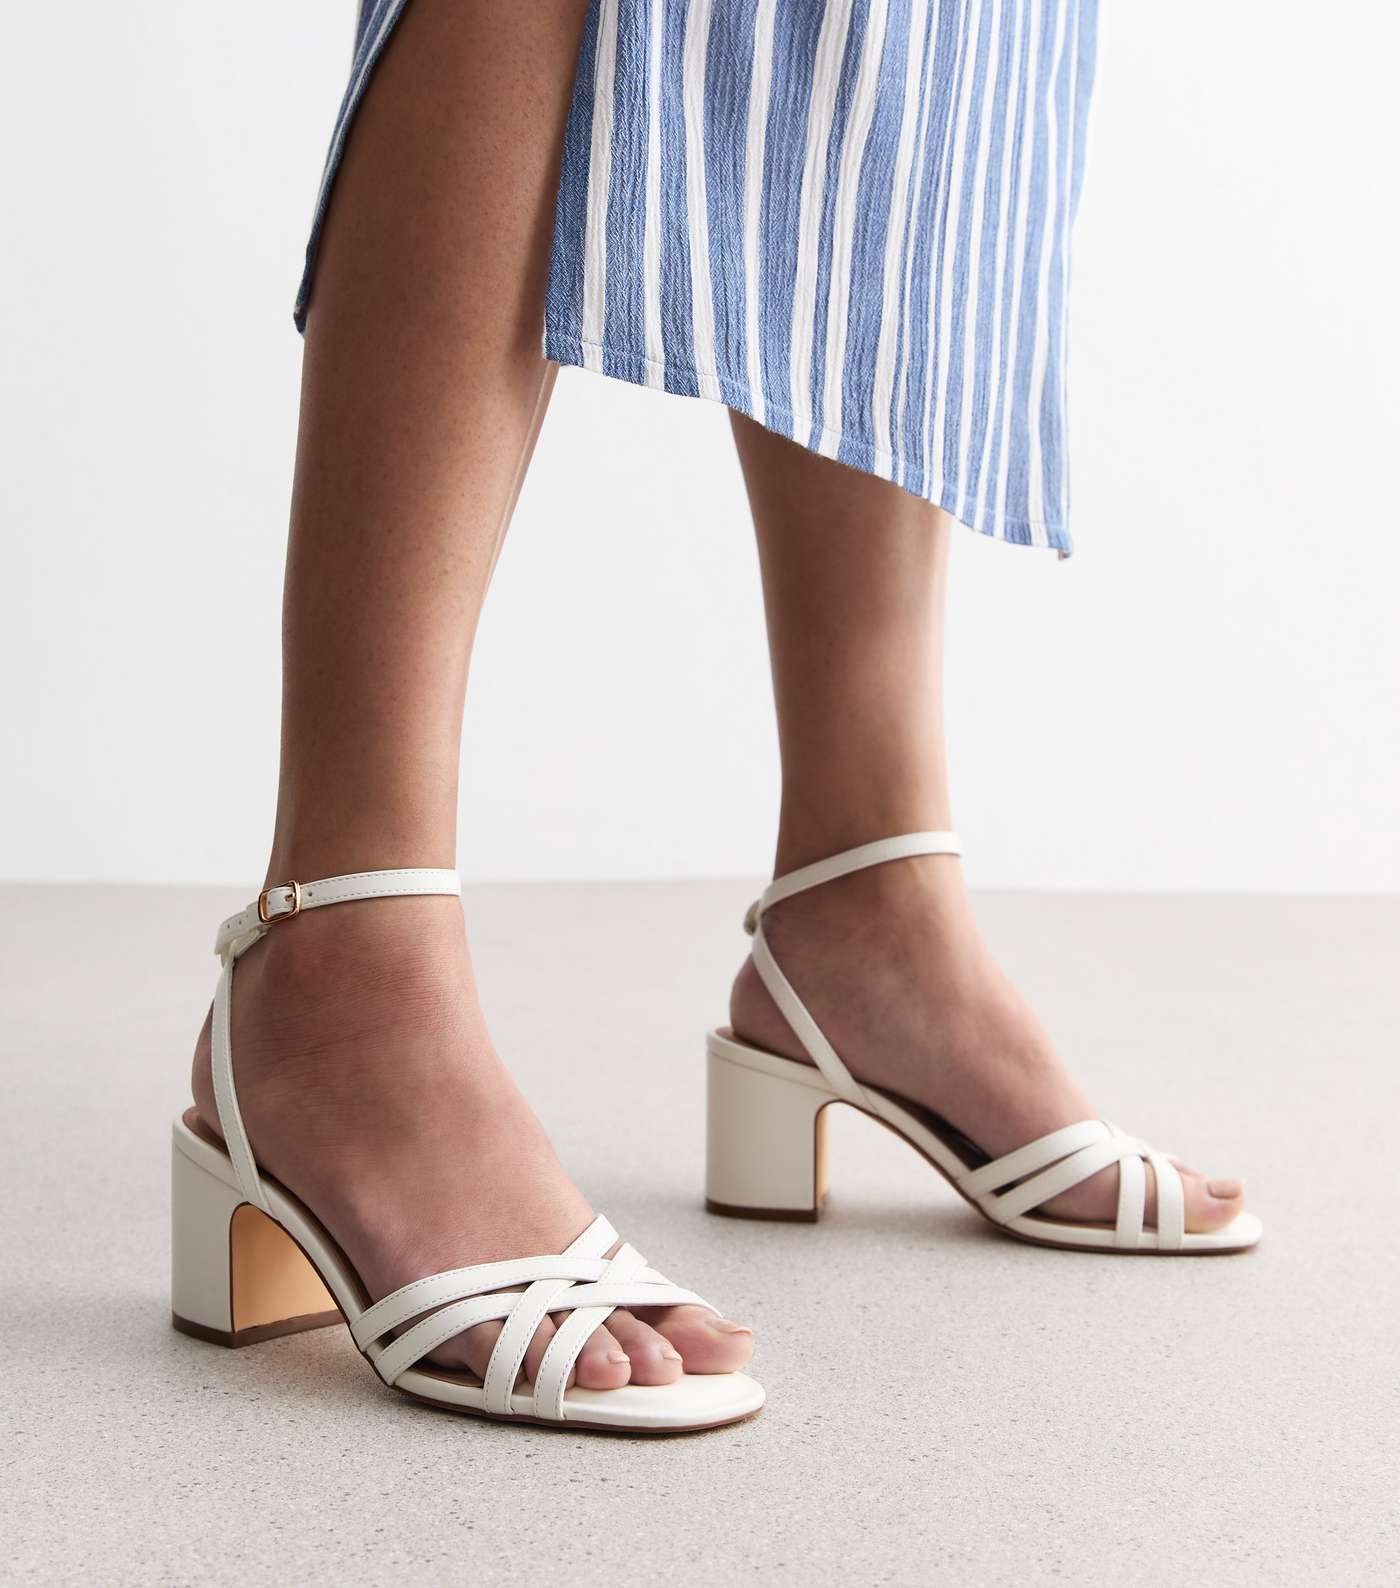 White Leather-Look Strappy Block Heel Sandals Image 2